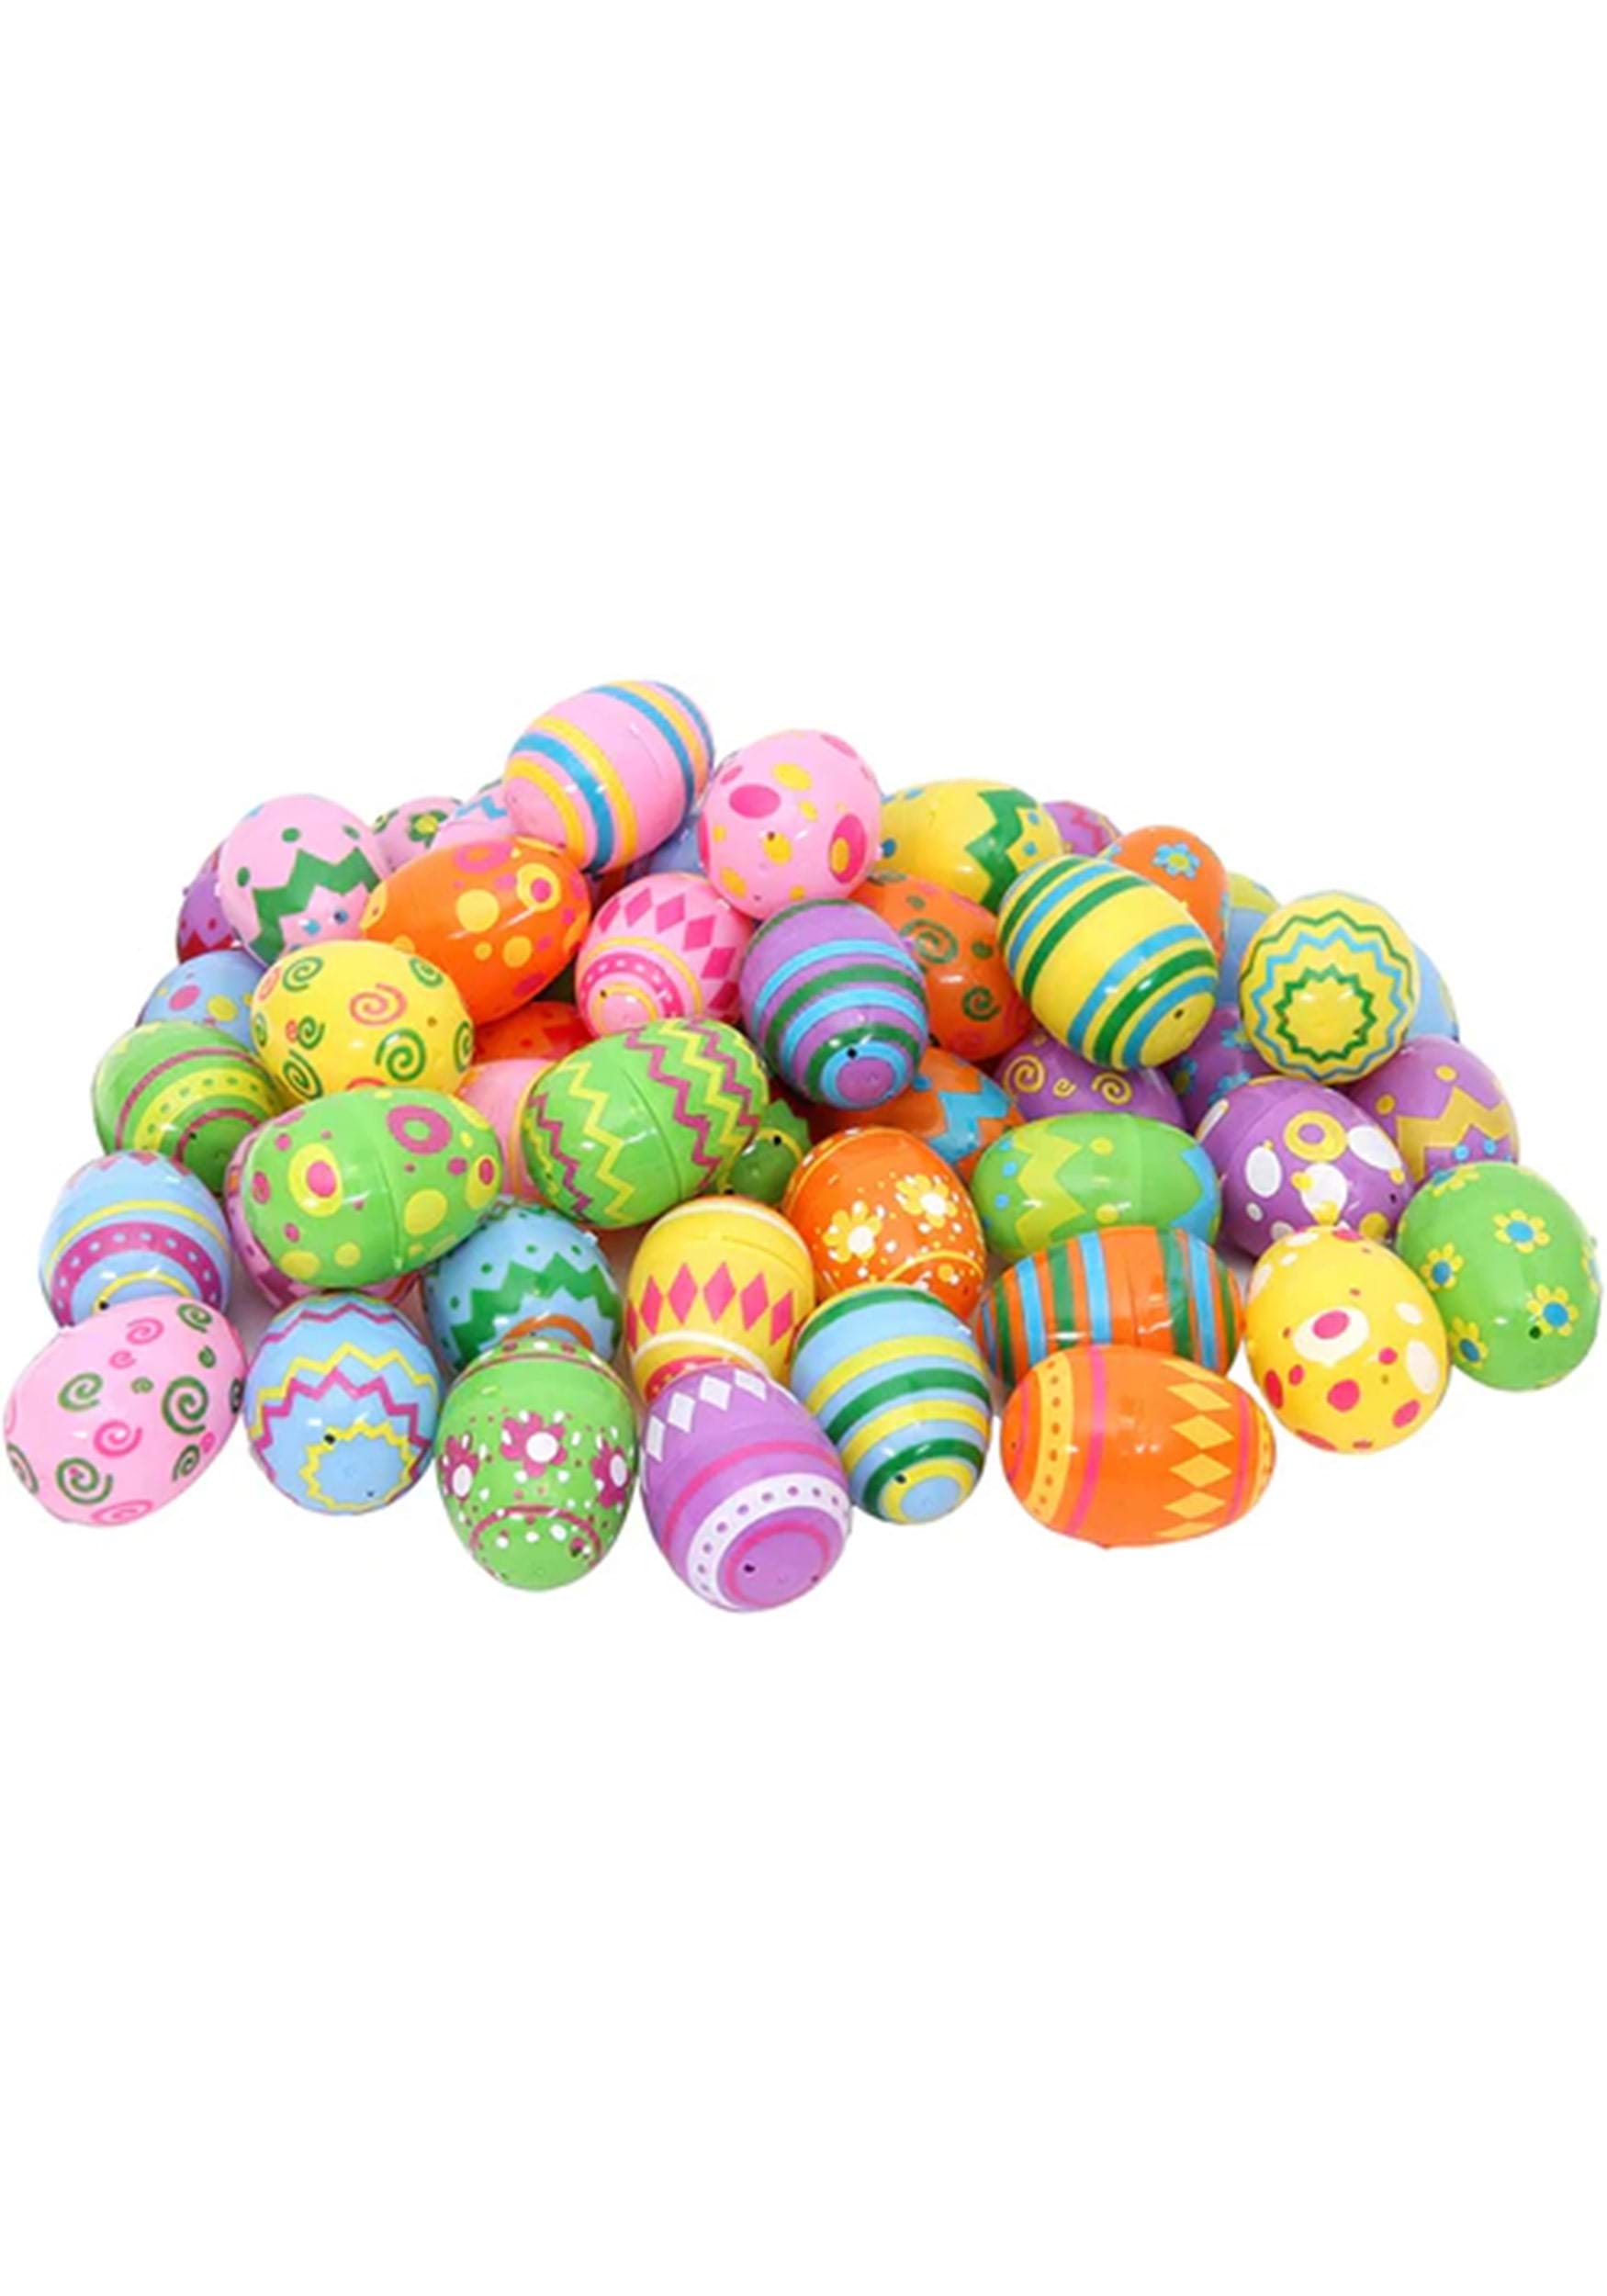 100 Piece Printed Plastic Egg Shells , Easter Egg Hunt Accessories